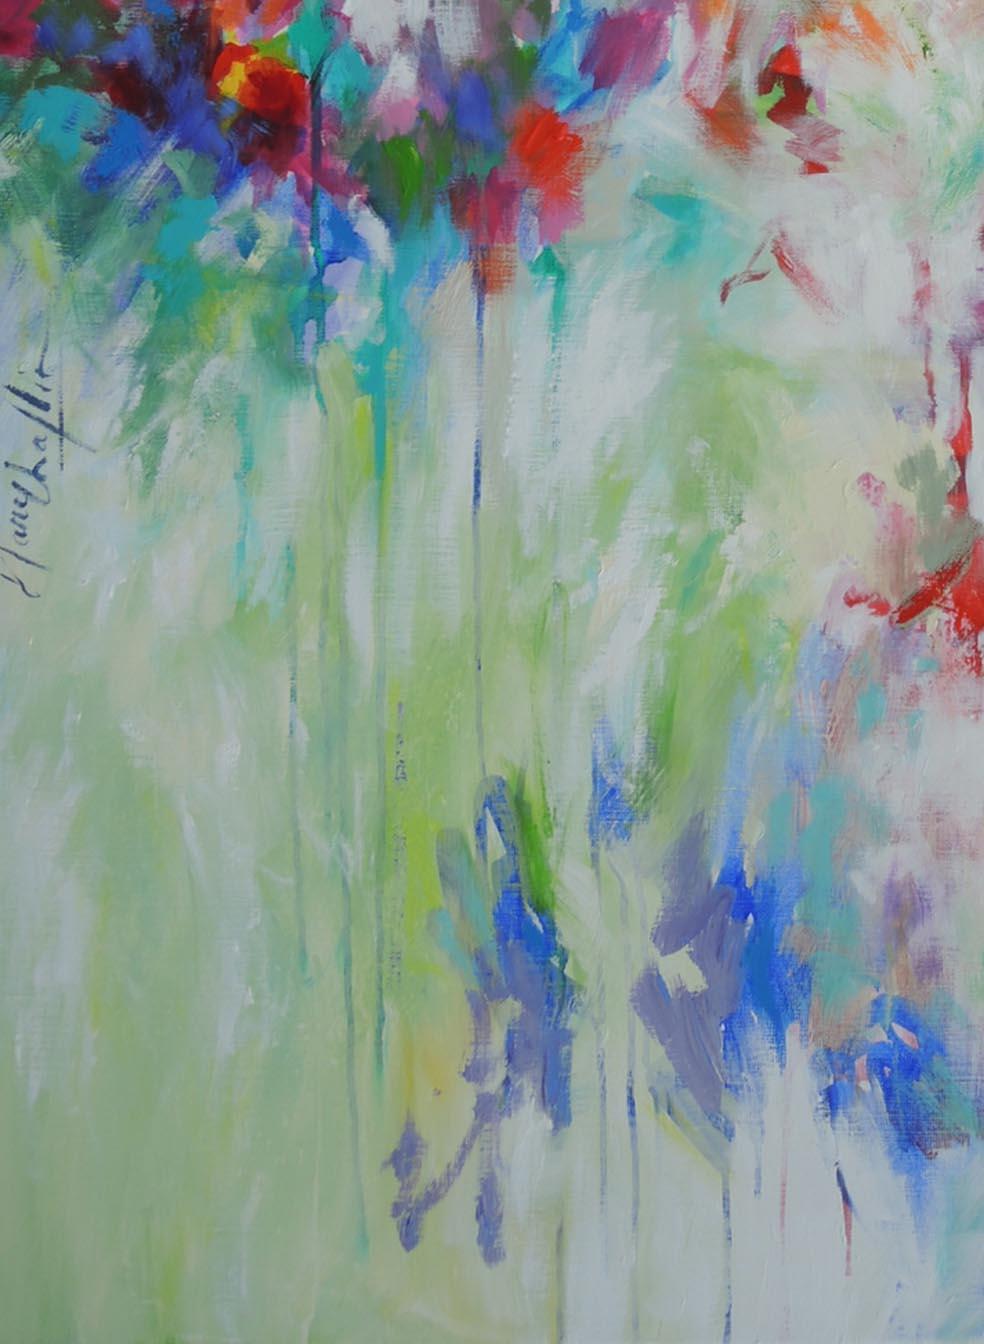 It Rained in May, a floral abstract painting with colour  - Painting by Mary Chaplin